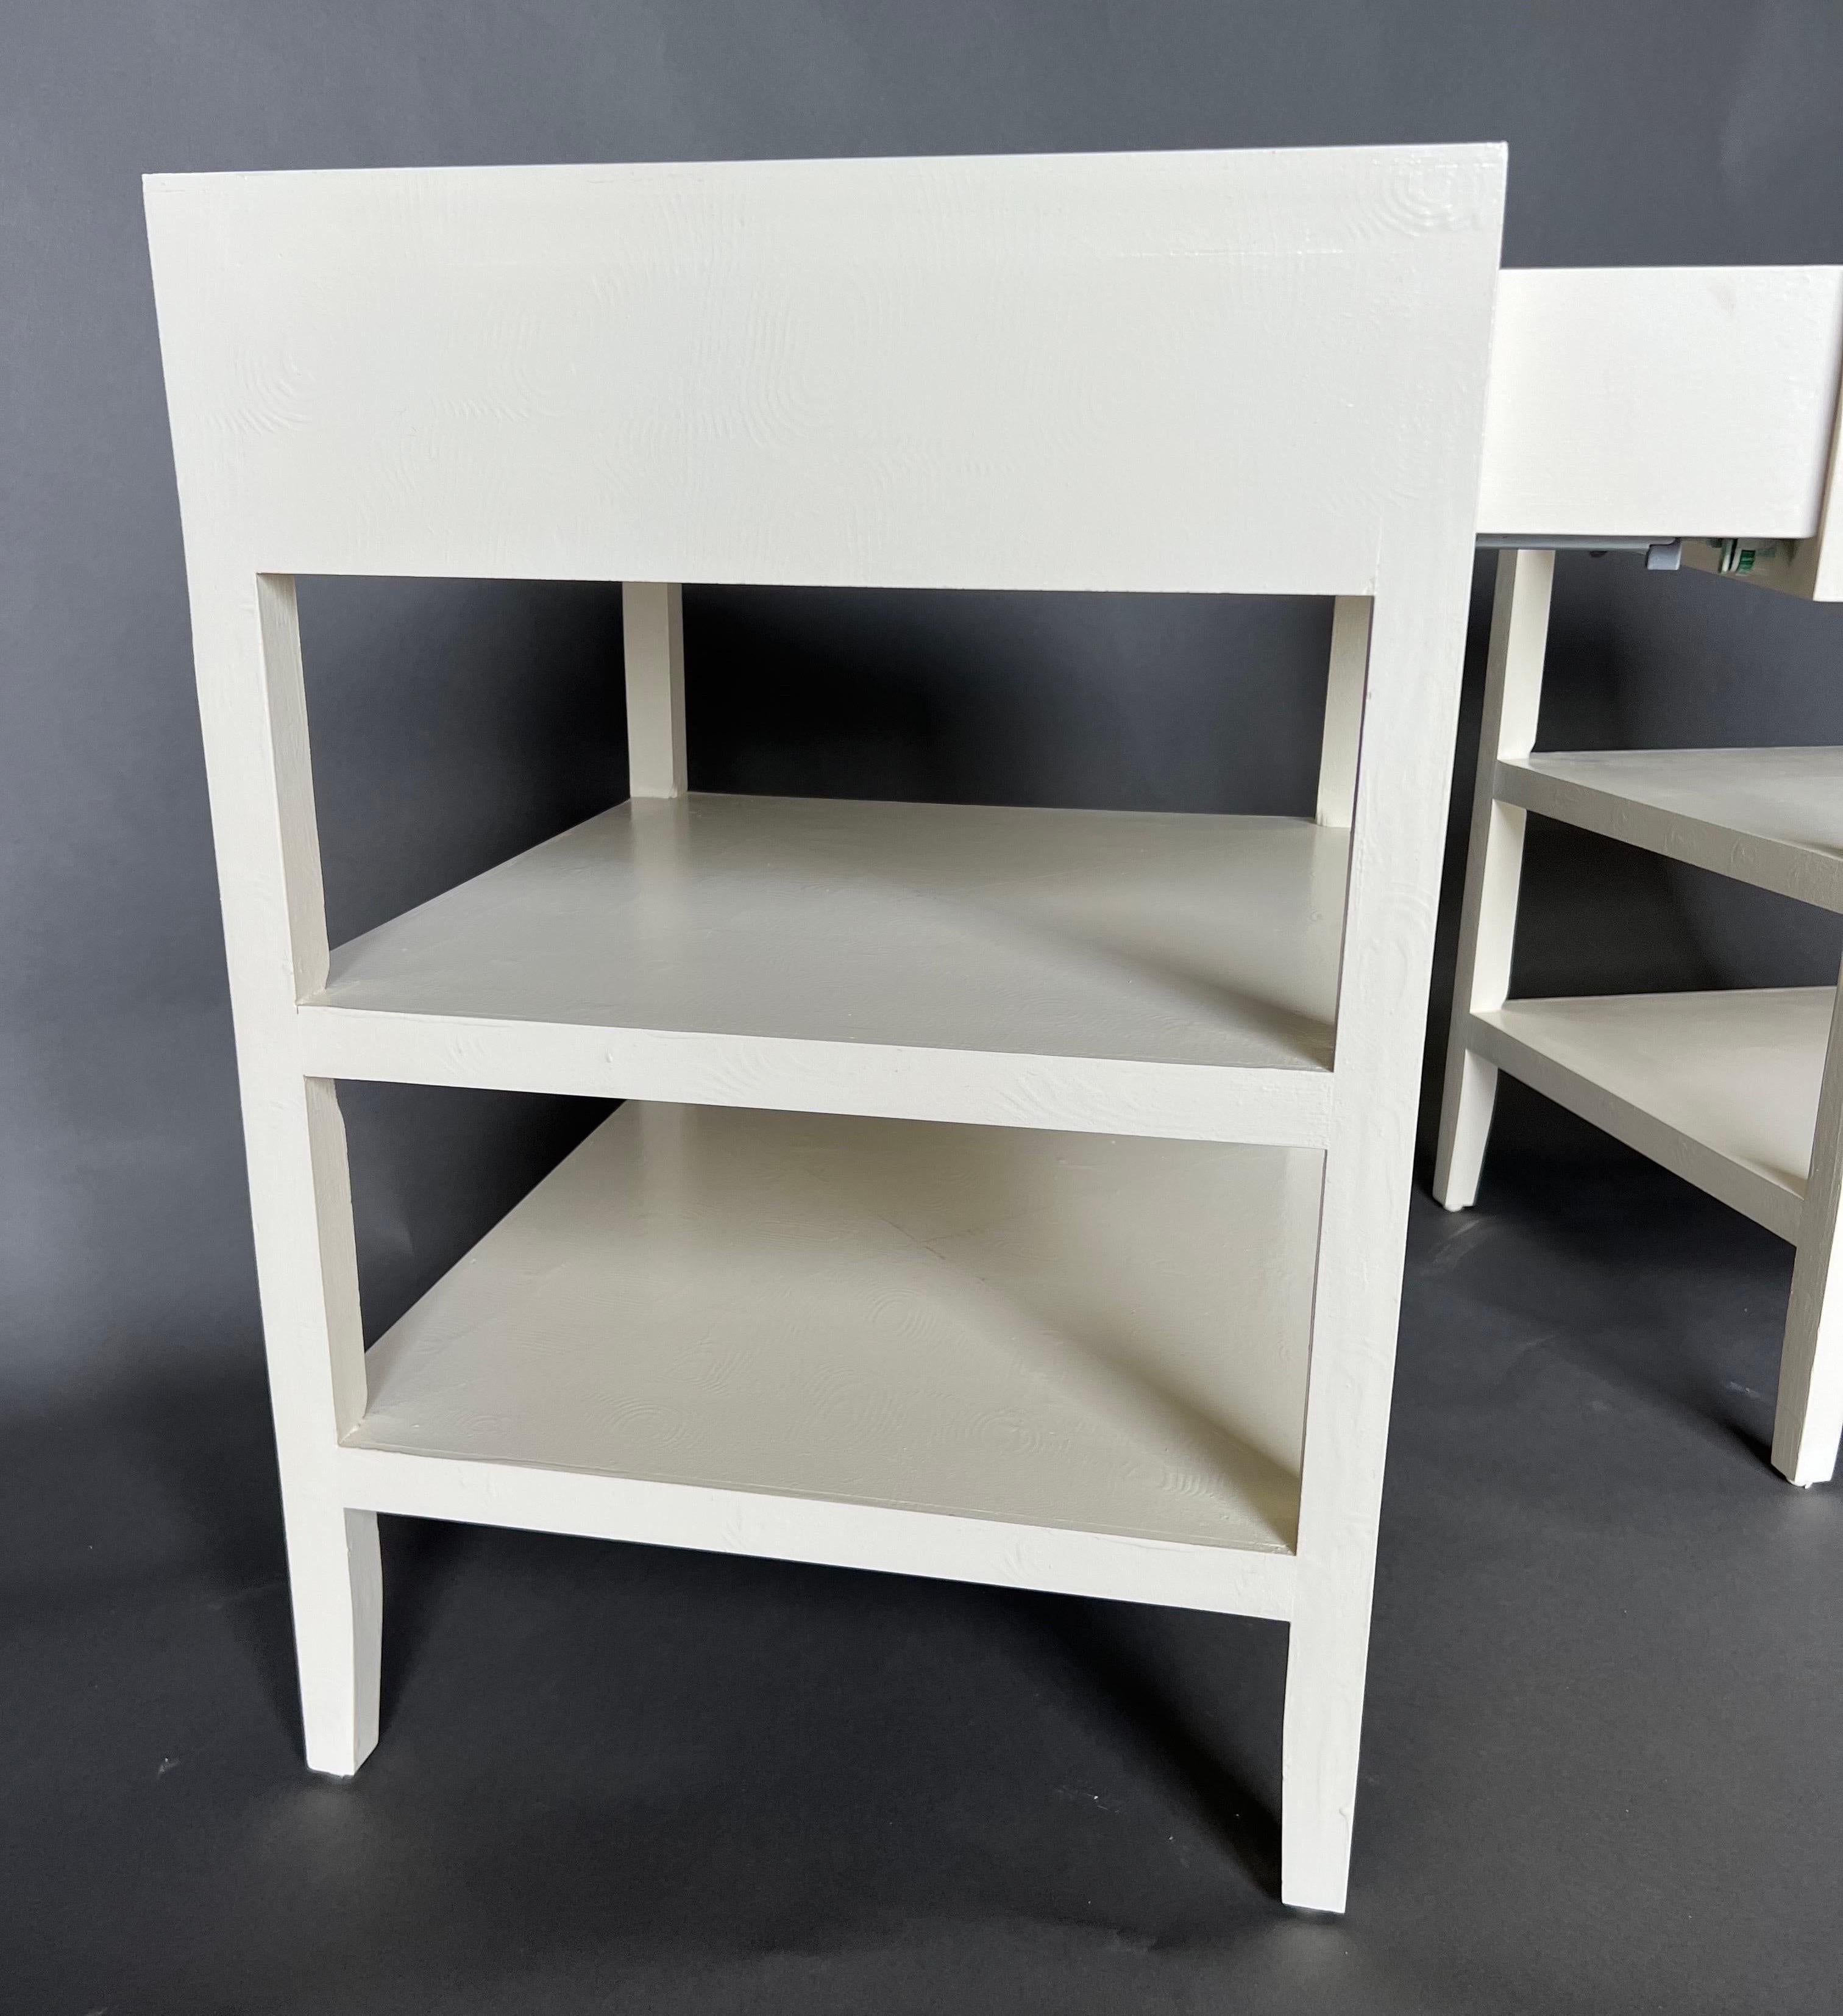 Custom made Caroline side table with single drawer by The Fabulous Things- seen here in light sand faux bois. Made to order in house by our cabinetmakers and hand painted in our custom finishes. Custom sizes and dimensions available 